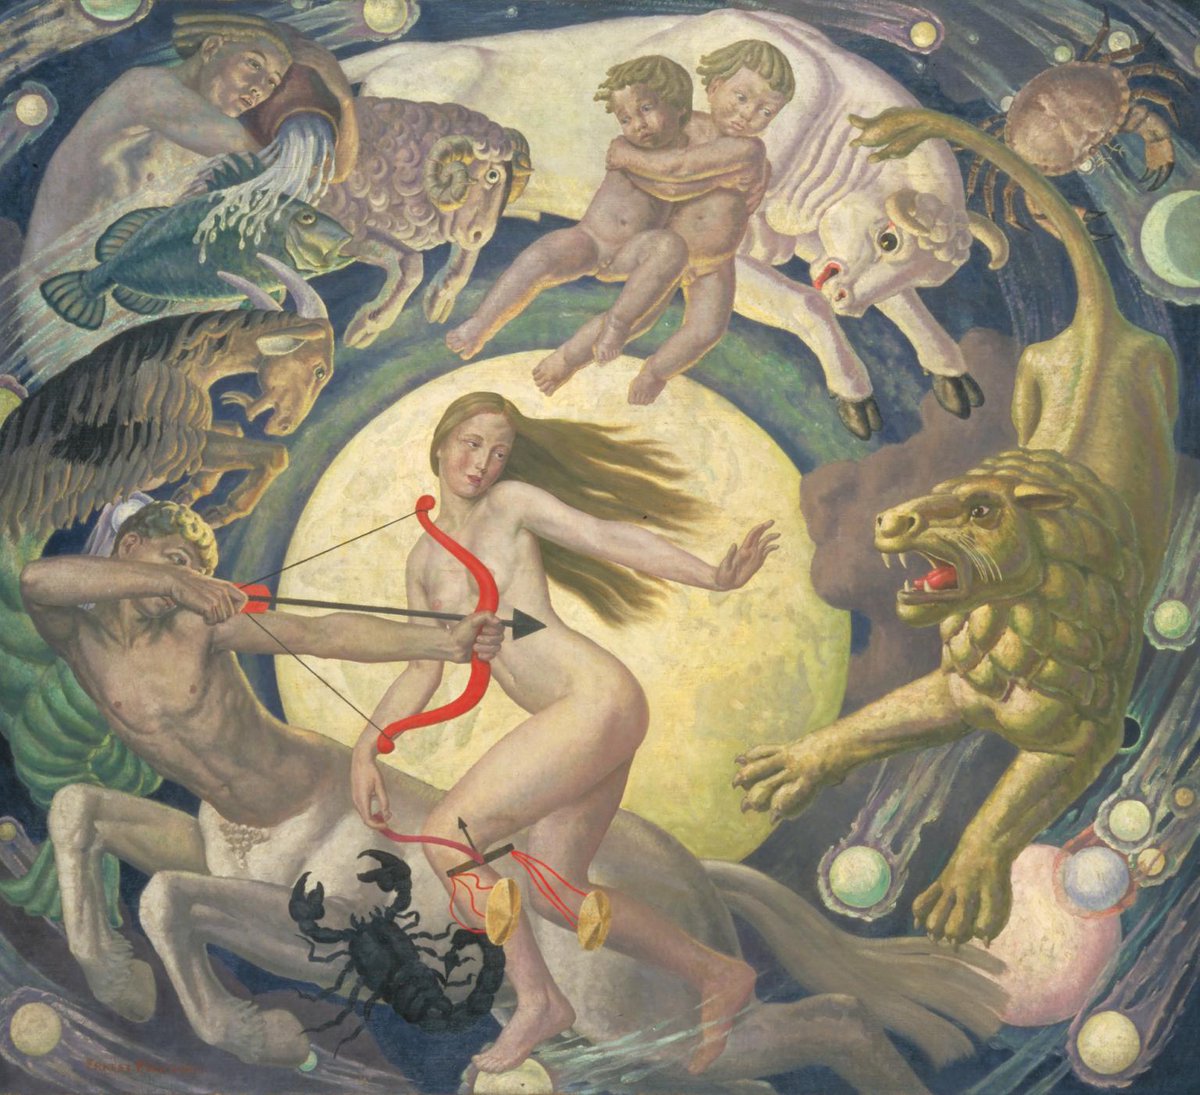 It's Taurus season! This painting cleverly combines representations of the twelve animal and human symbols of the Zodiac. Can you spot them? 💧🐟🐂👭🦀🦁 ⚖️🦂 🏹🐐 🖼️ Ernest Procter The Zodiac 1925. Tate